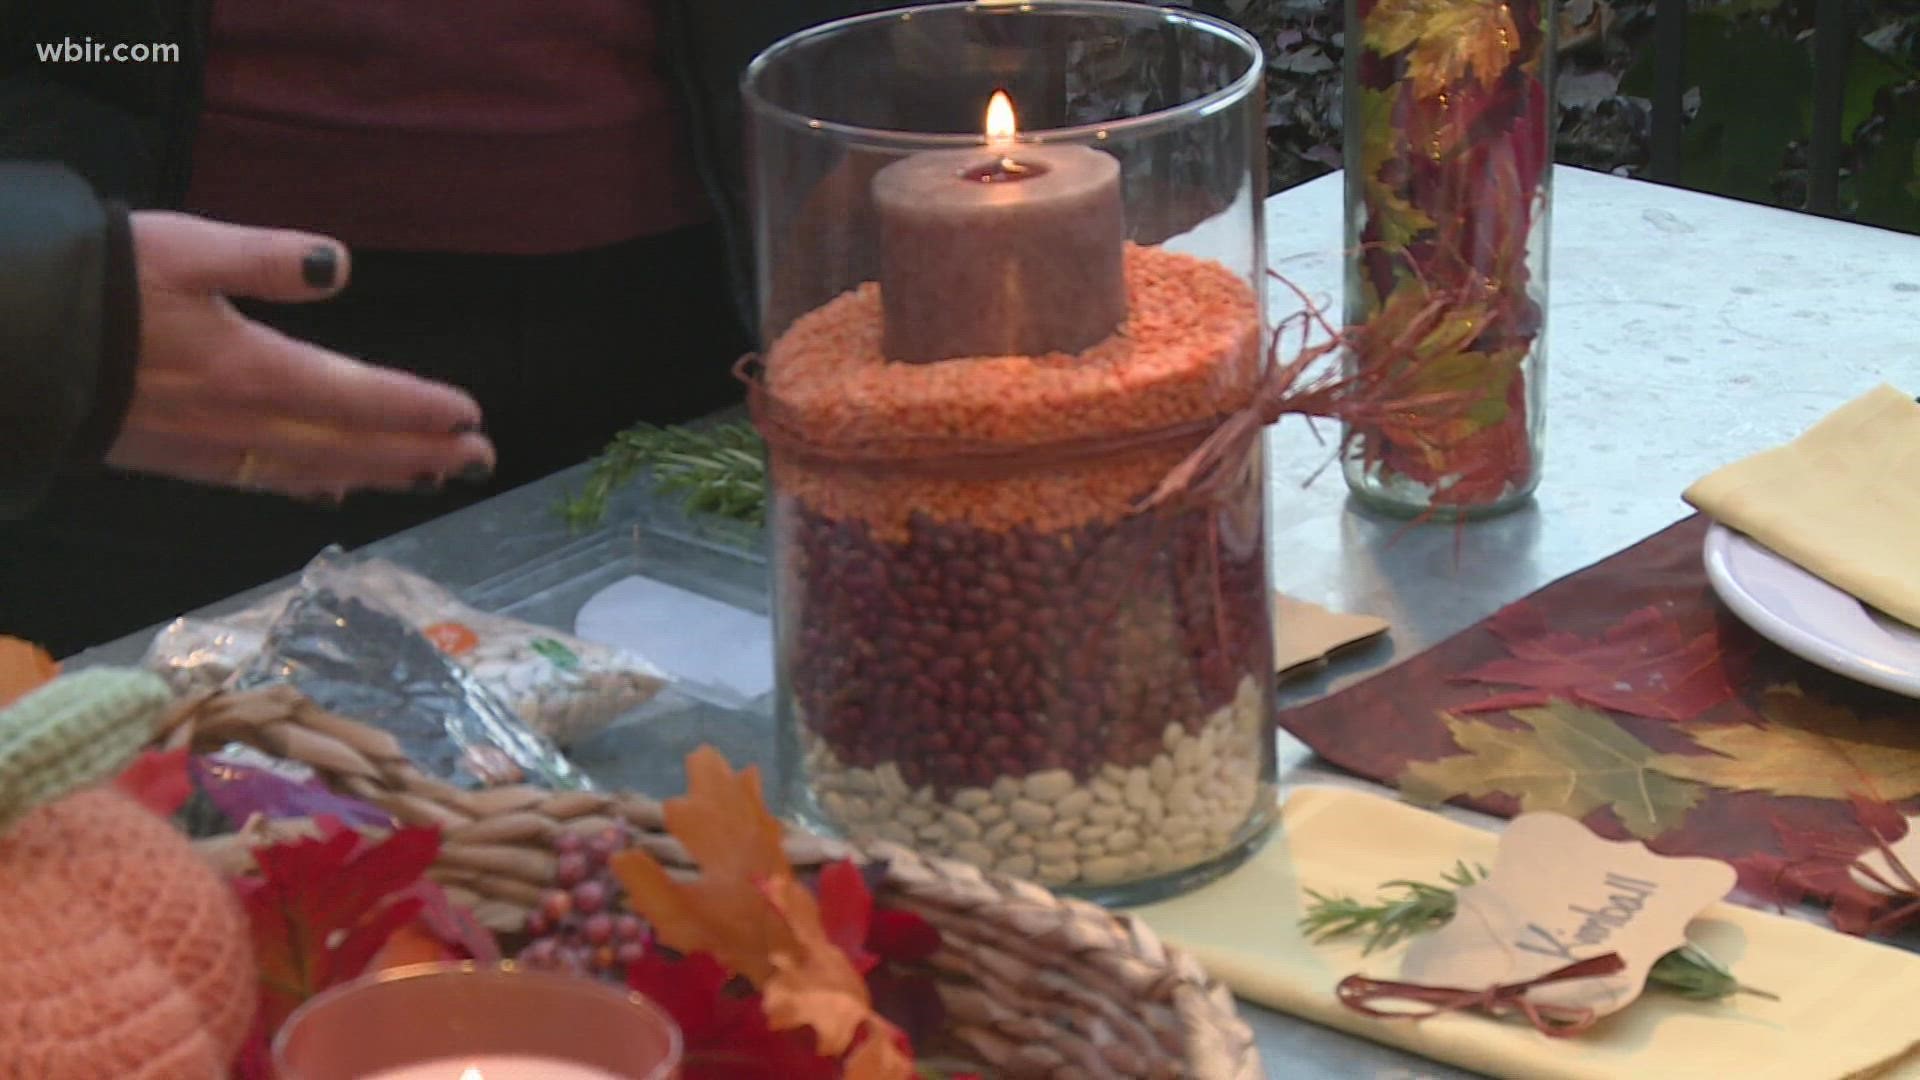 From easy tablescapes to conversation starters, here are some ideas to try for your Thanksgiving dinner from UT Extension's Heather Kyle-Harmon. Nov. 23, 2021-4pm.